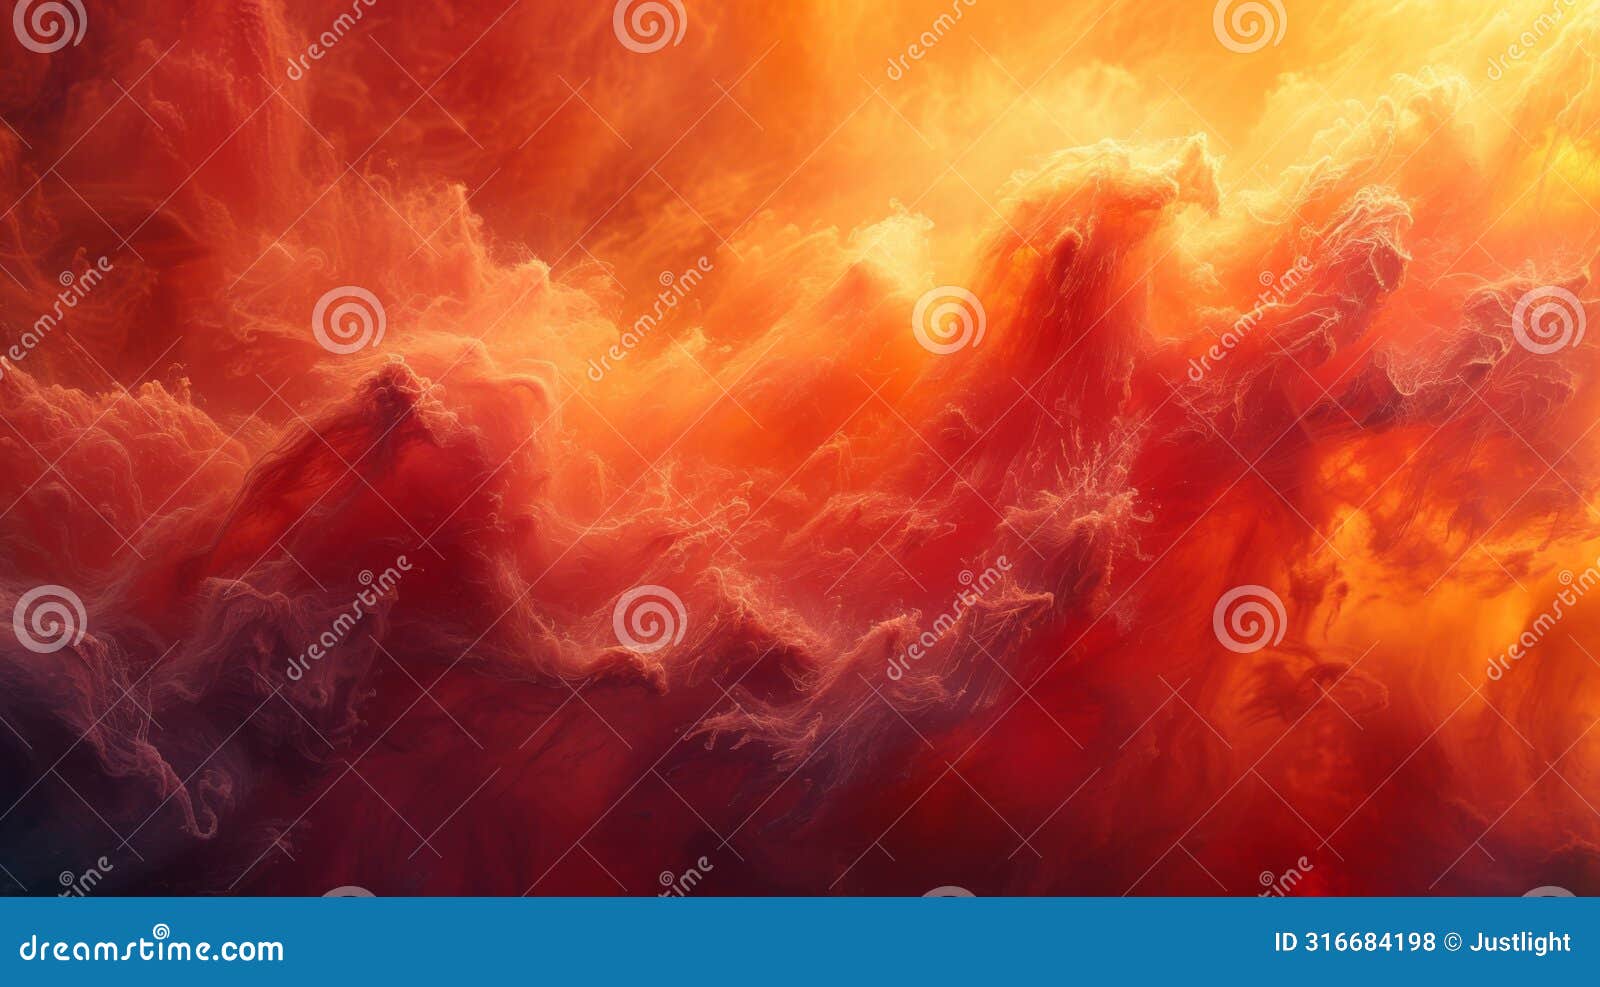 texture of the mesmerizing fire with a gradient of reds and oranges creating a hypnotic effect